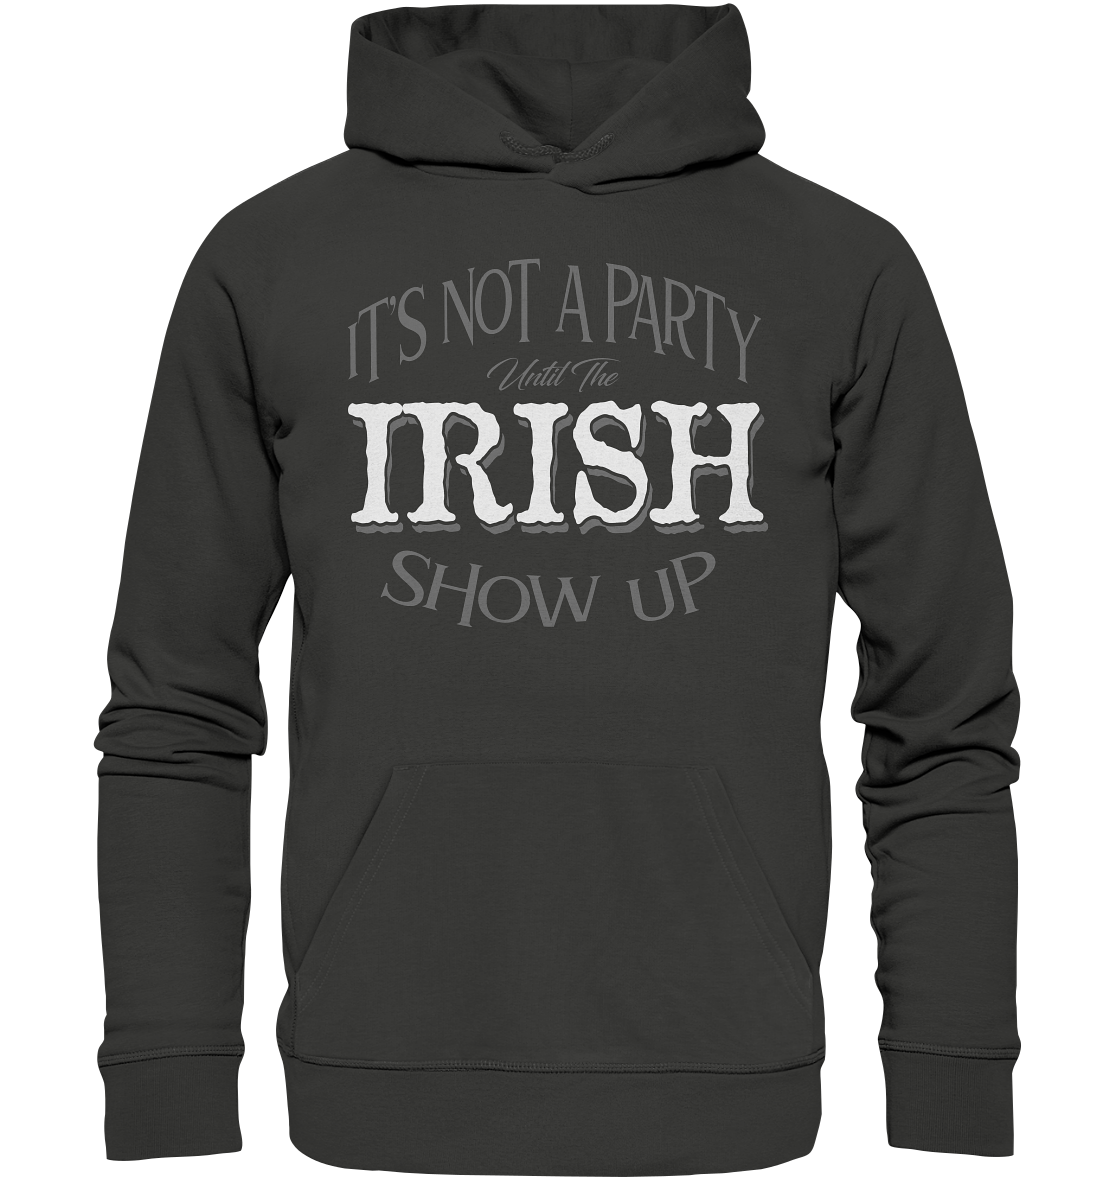 It's Not A Party Until The Irish Show Up - Premium Unisex Hoodie